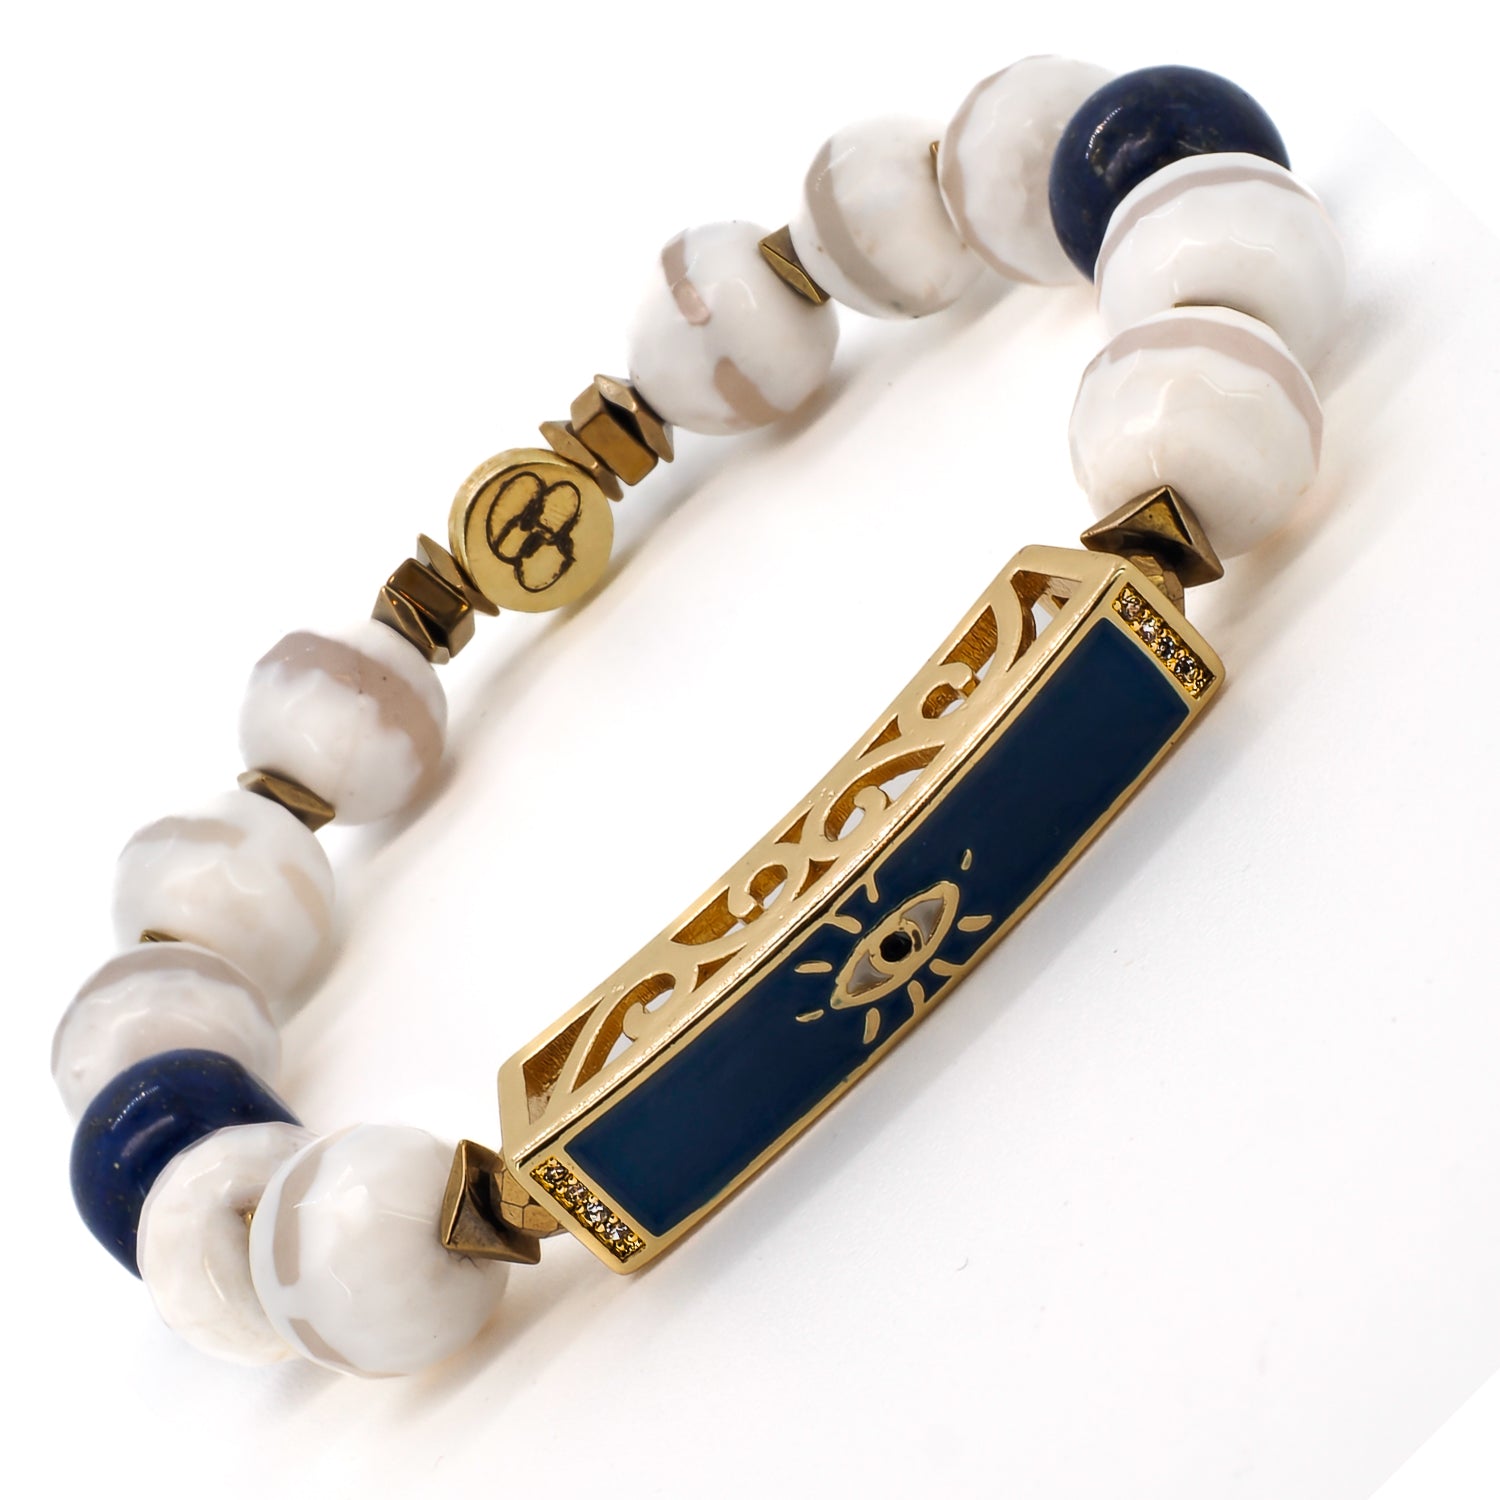 Handcrafted with care and attention to detail, the Blue Amulet Bracelet